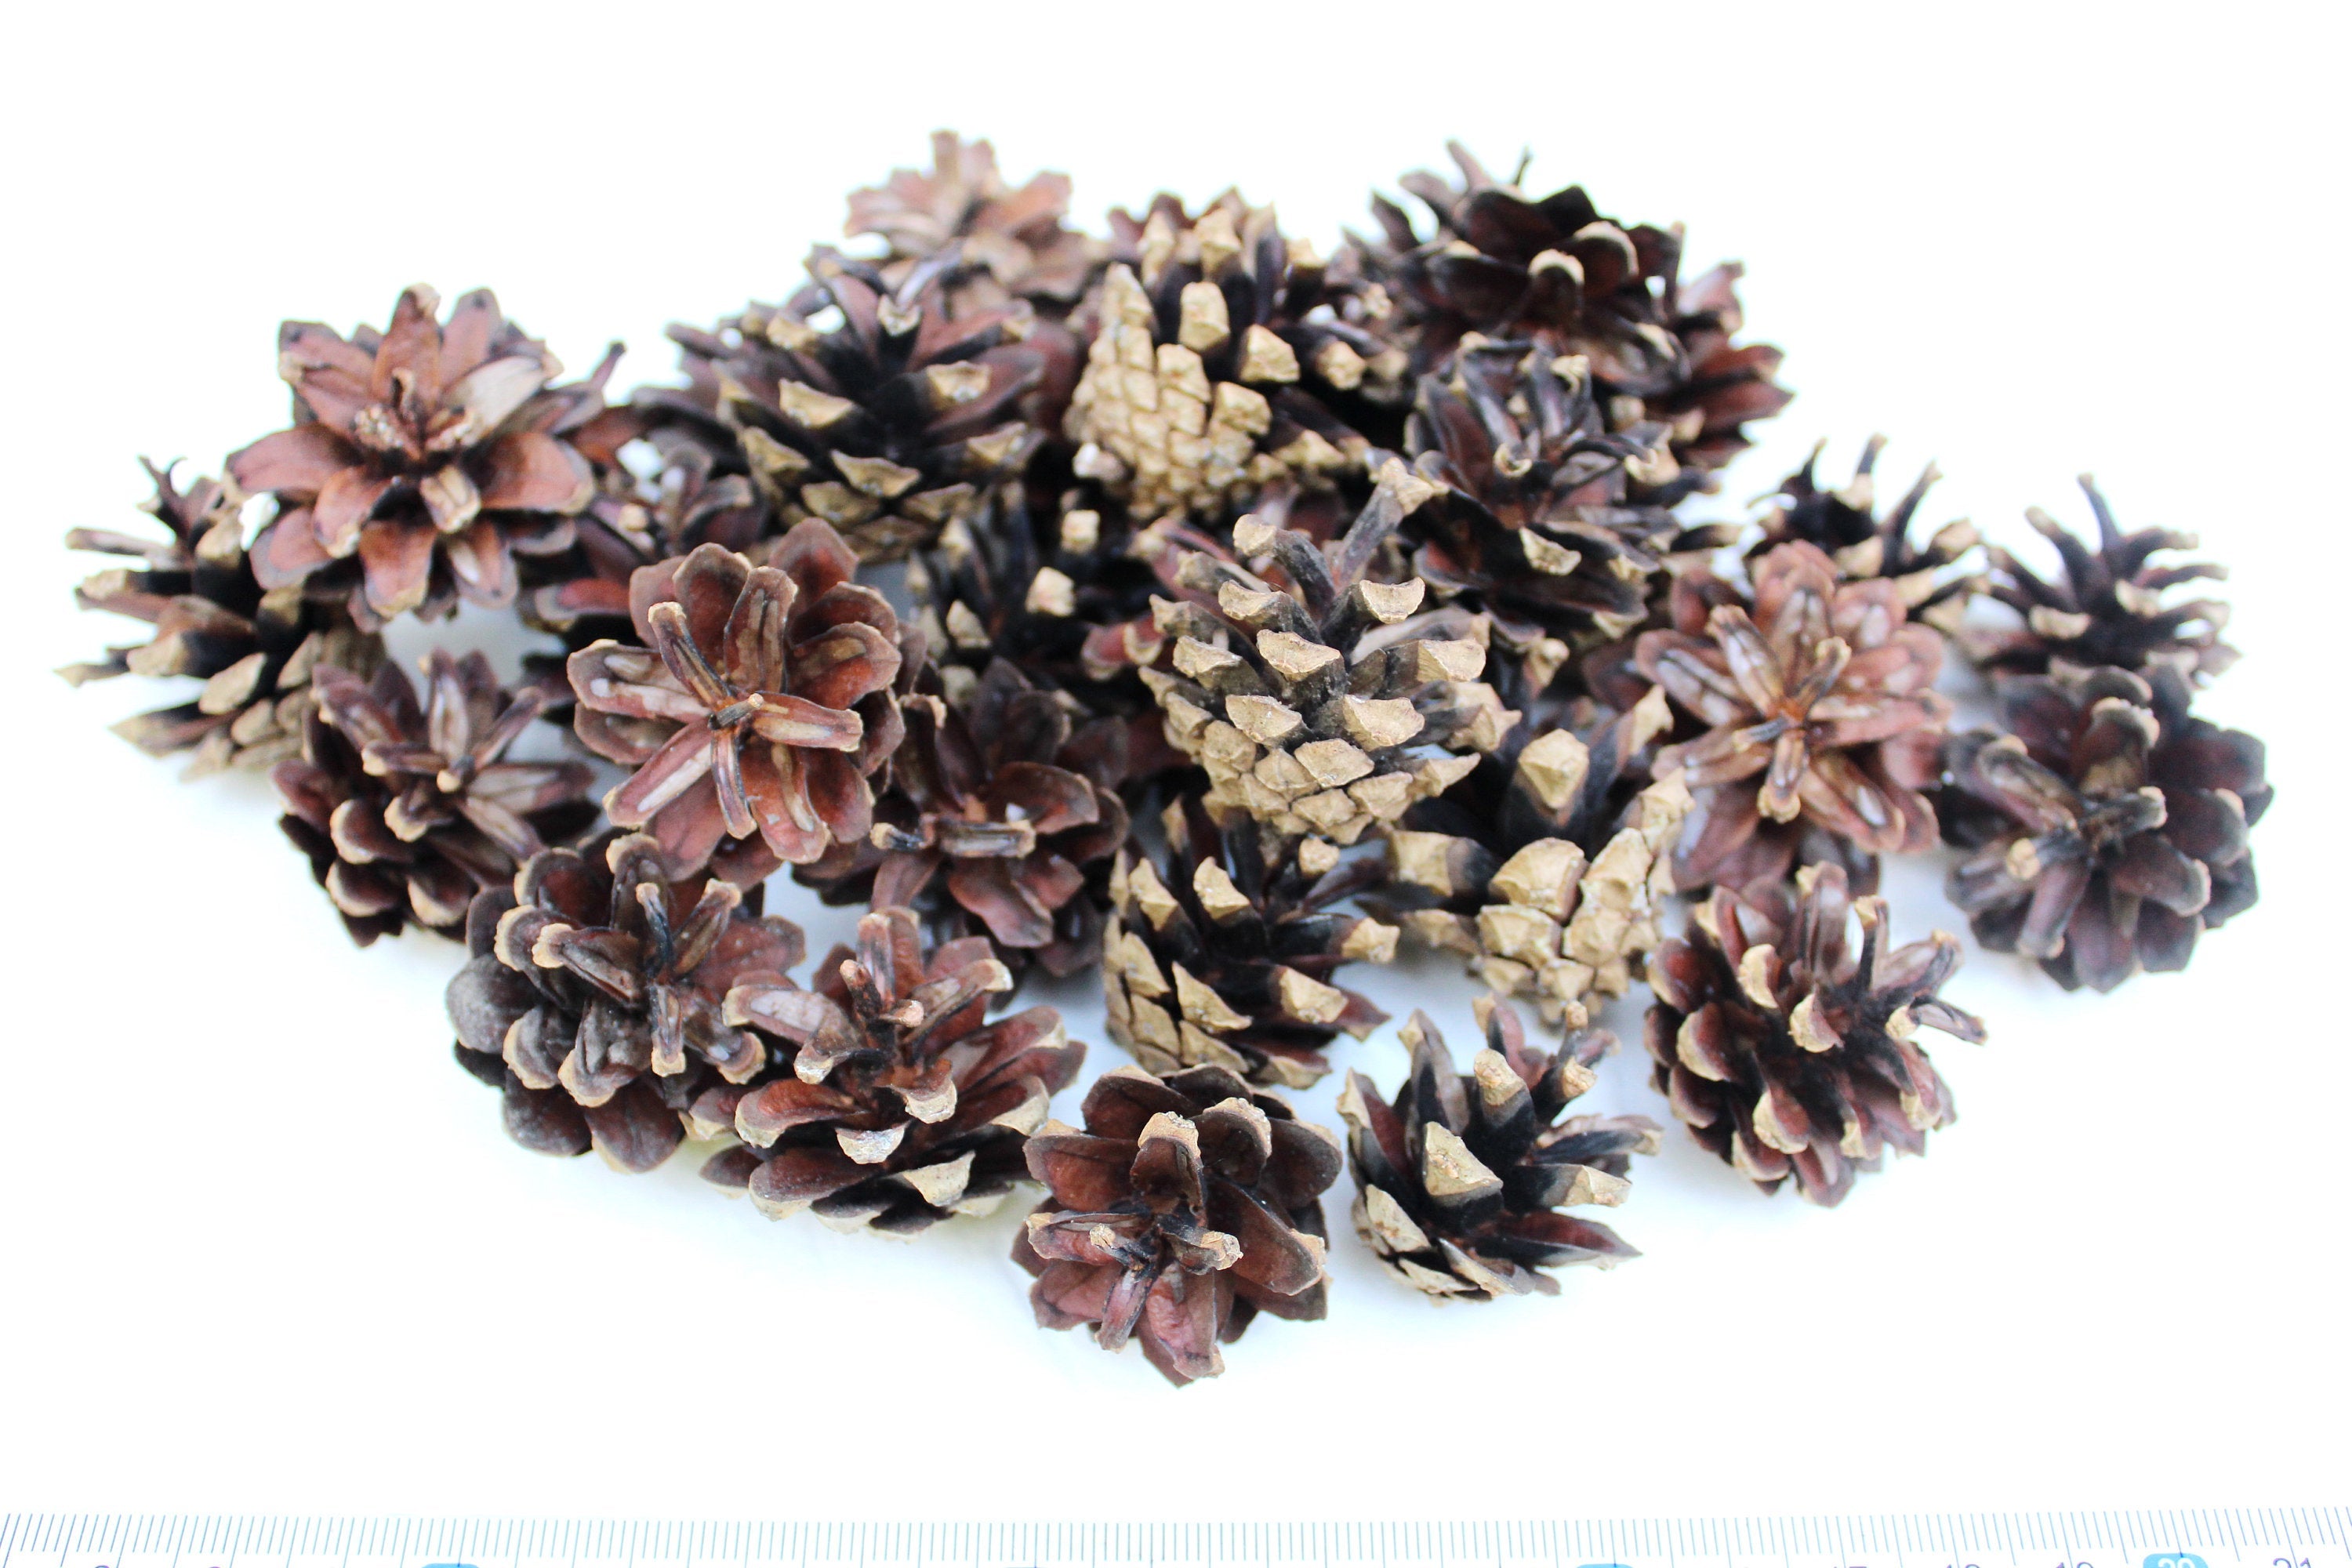 Free 25 Dried Pine Cones, High Quality, Natural, Organic, Biodegraddable, Craft, Home Decoration, Christmas Decor